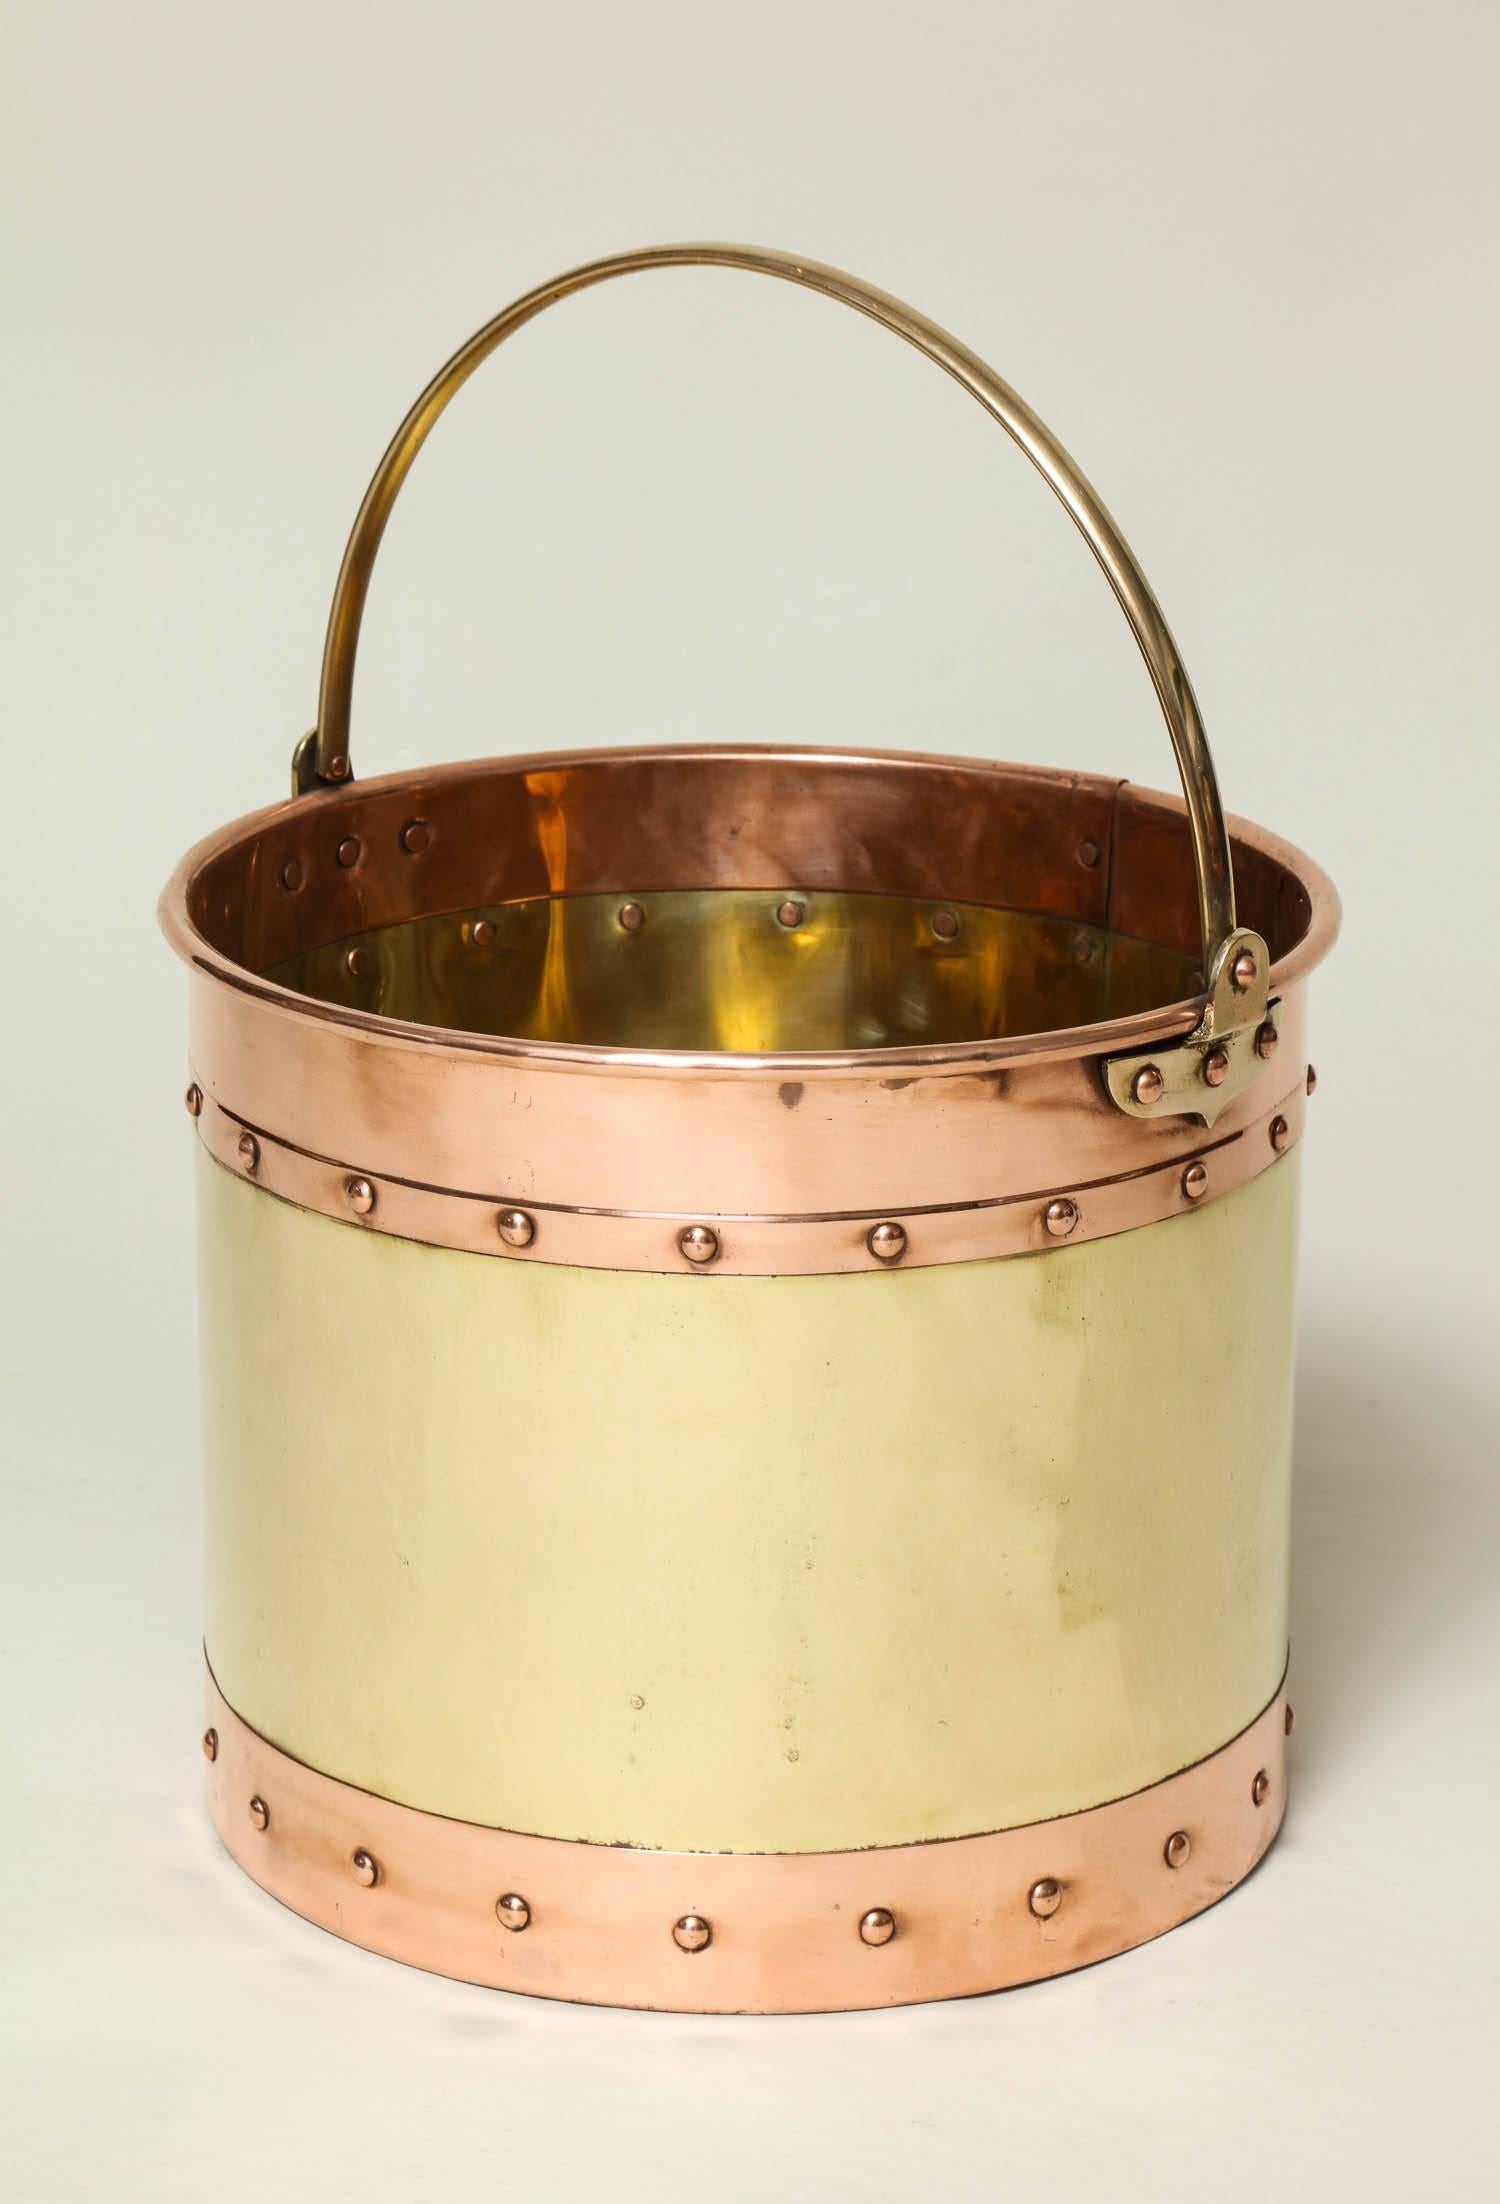 Good early 20th century brass and copper kindling or wastepaper bucket with brass bail handle over riveted bands of copper flanking brass body, recently well polished and of good sturdy weight and construction.